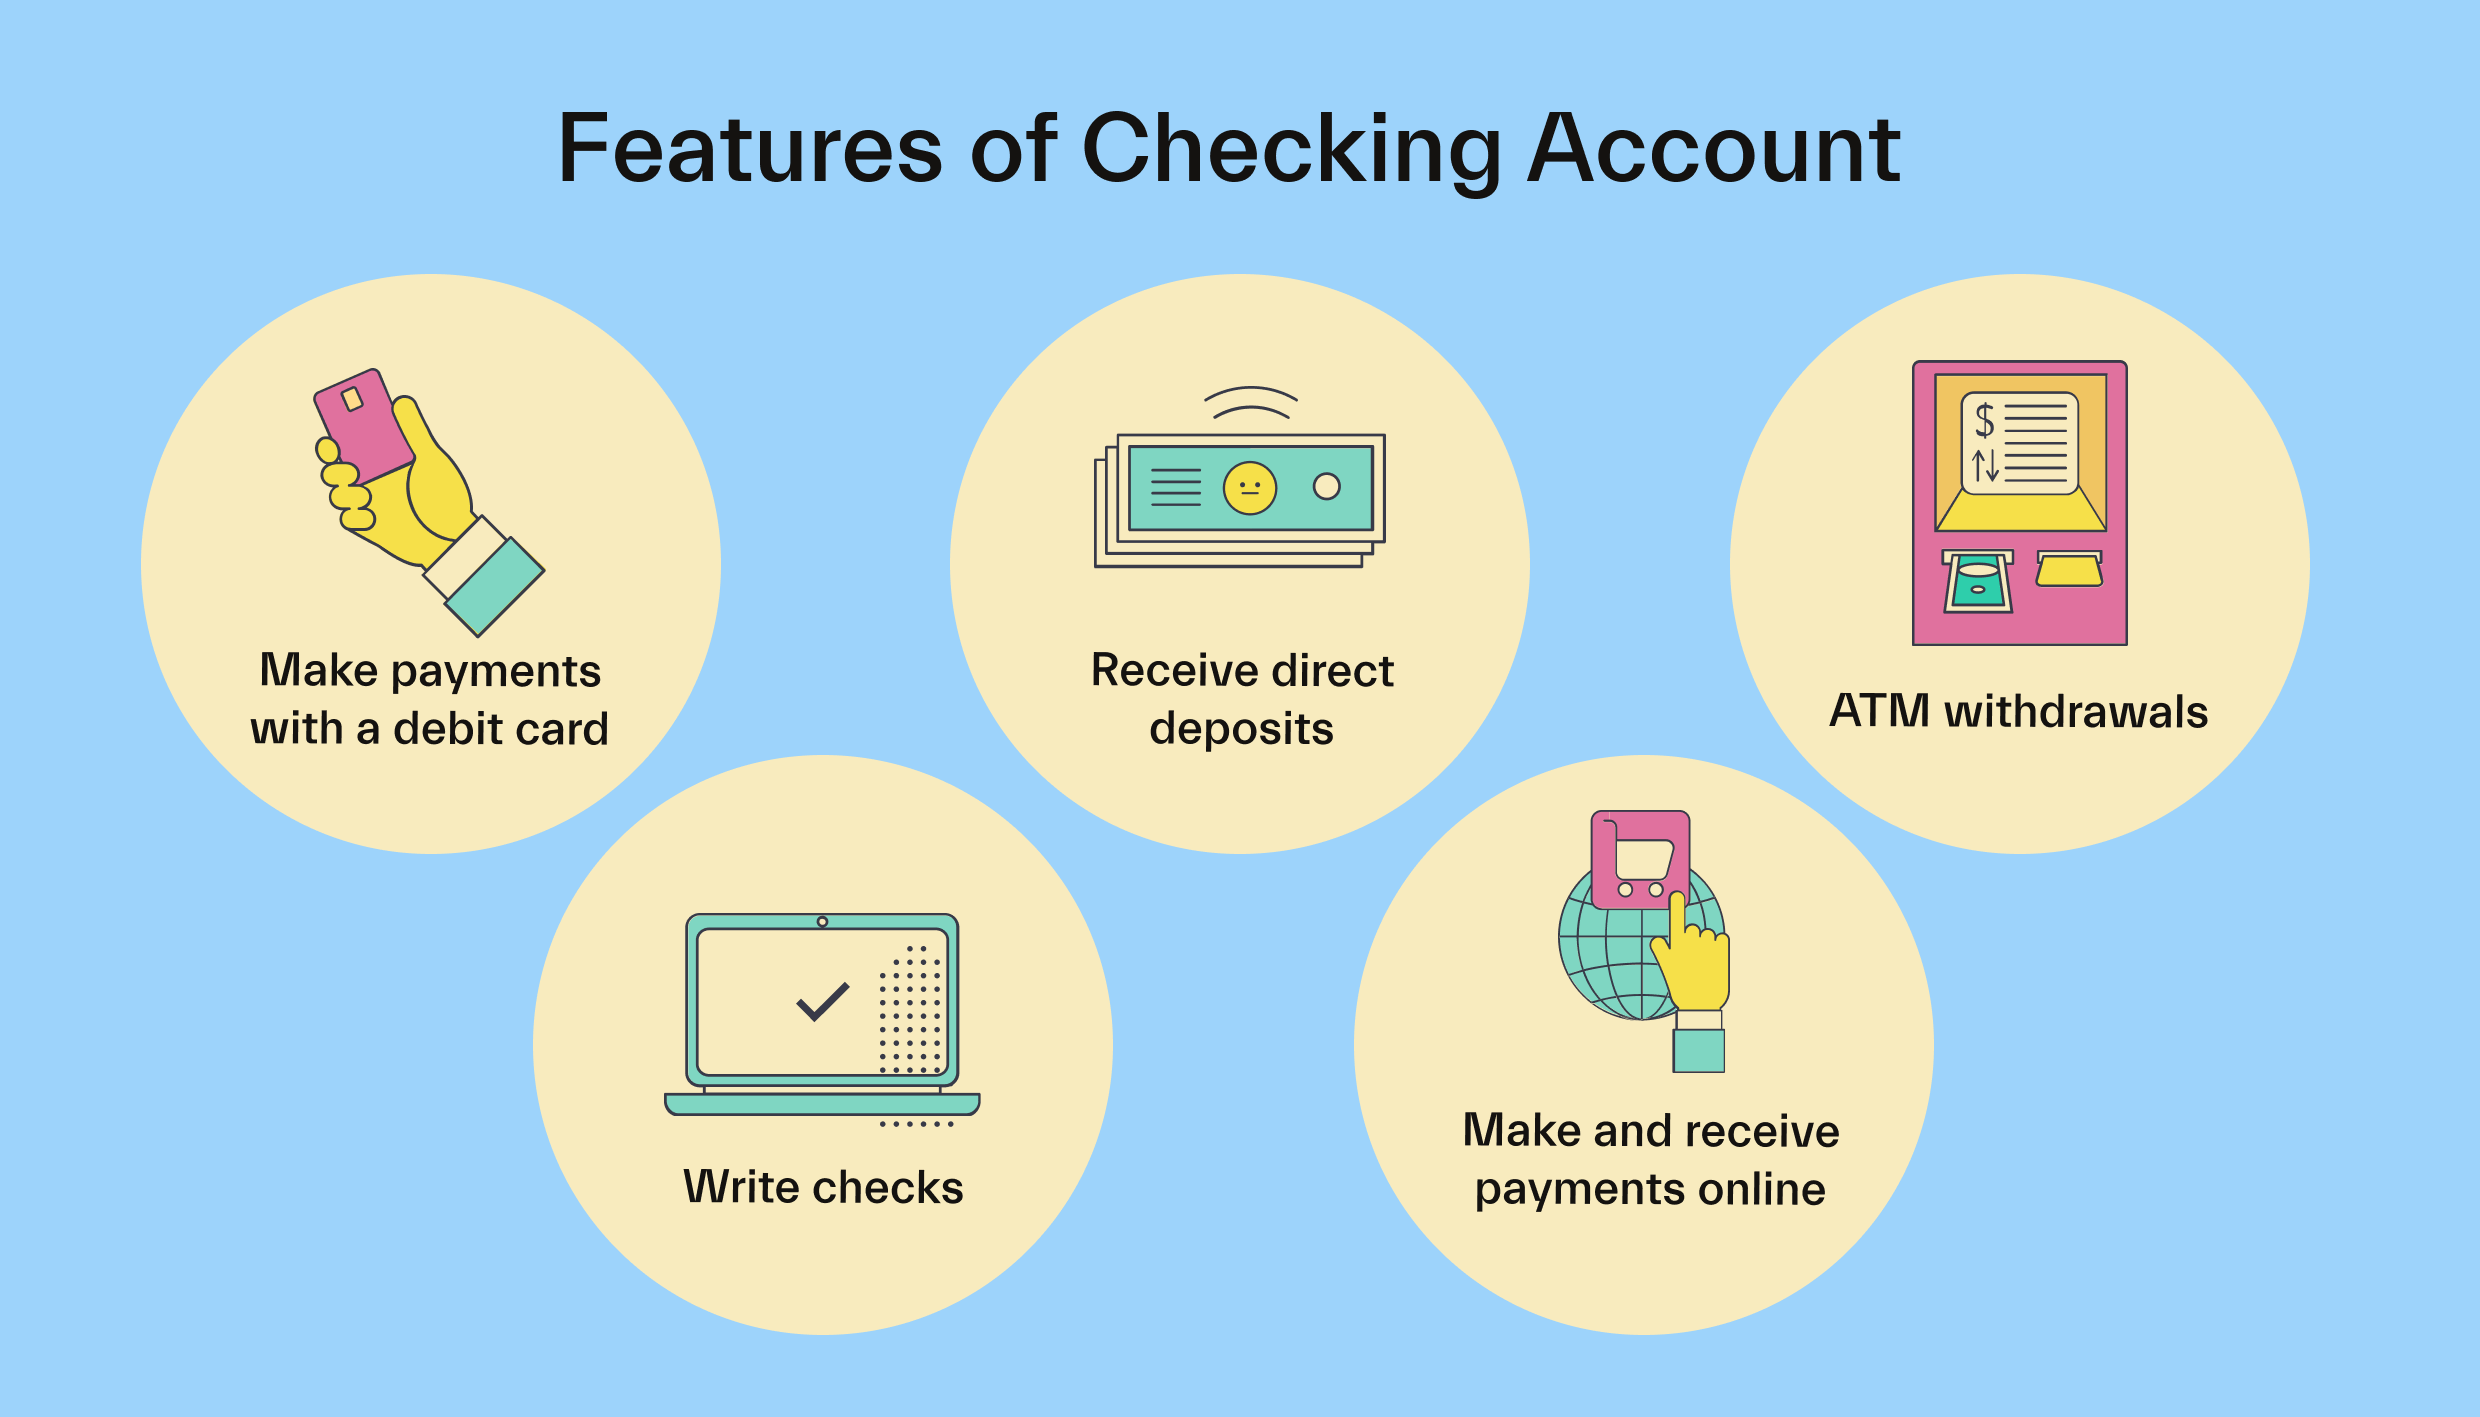 Features of Checking Account